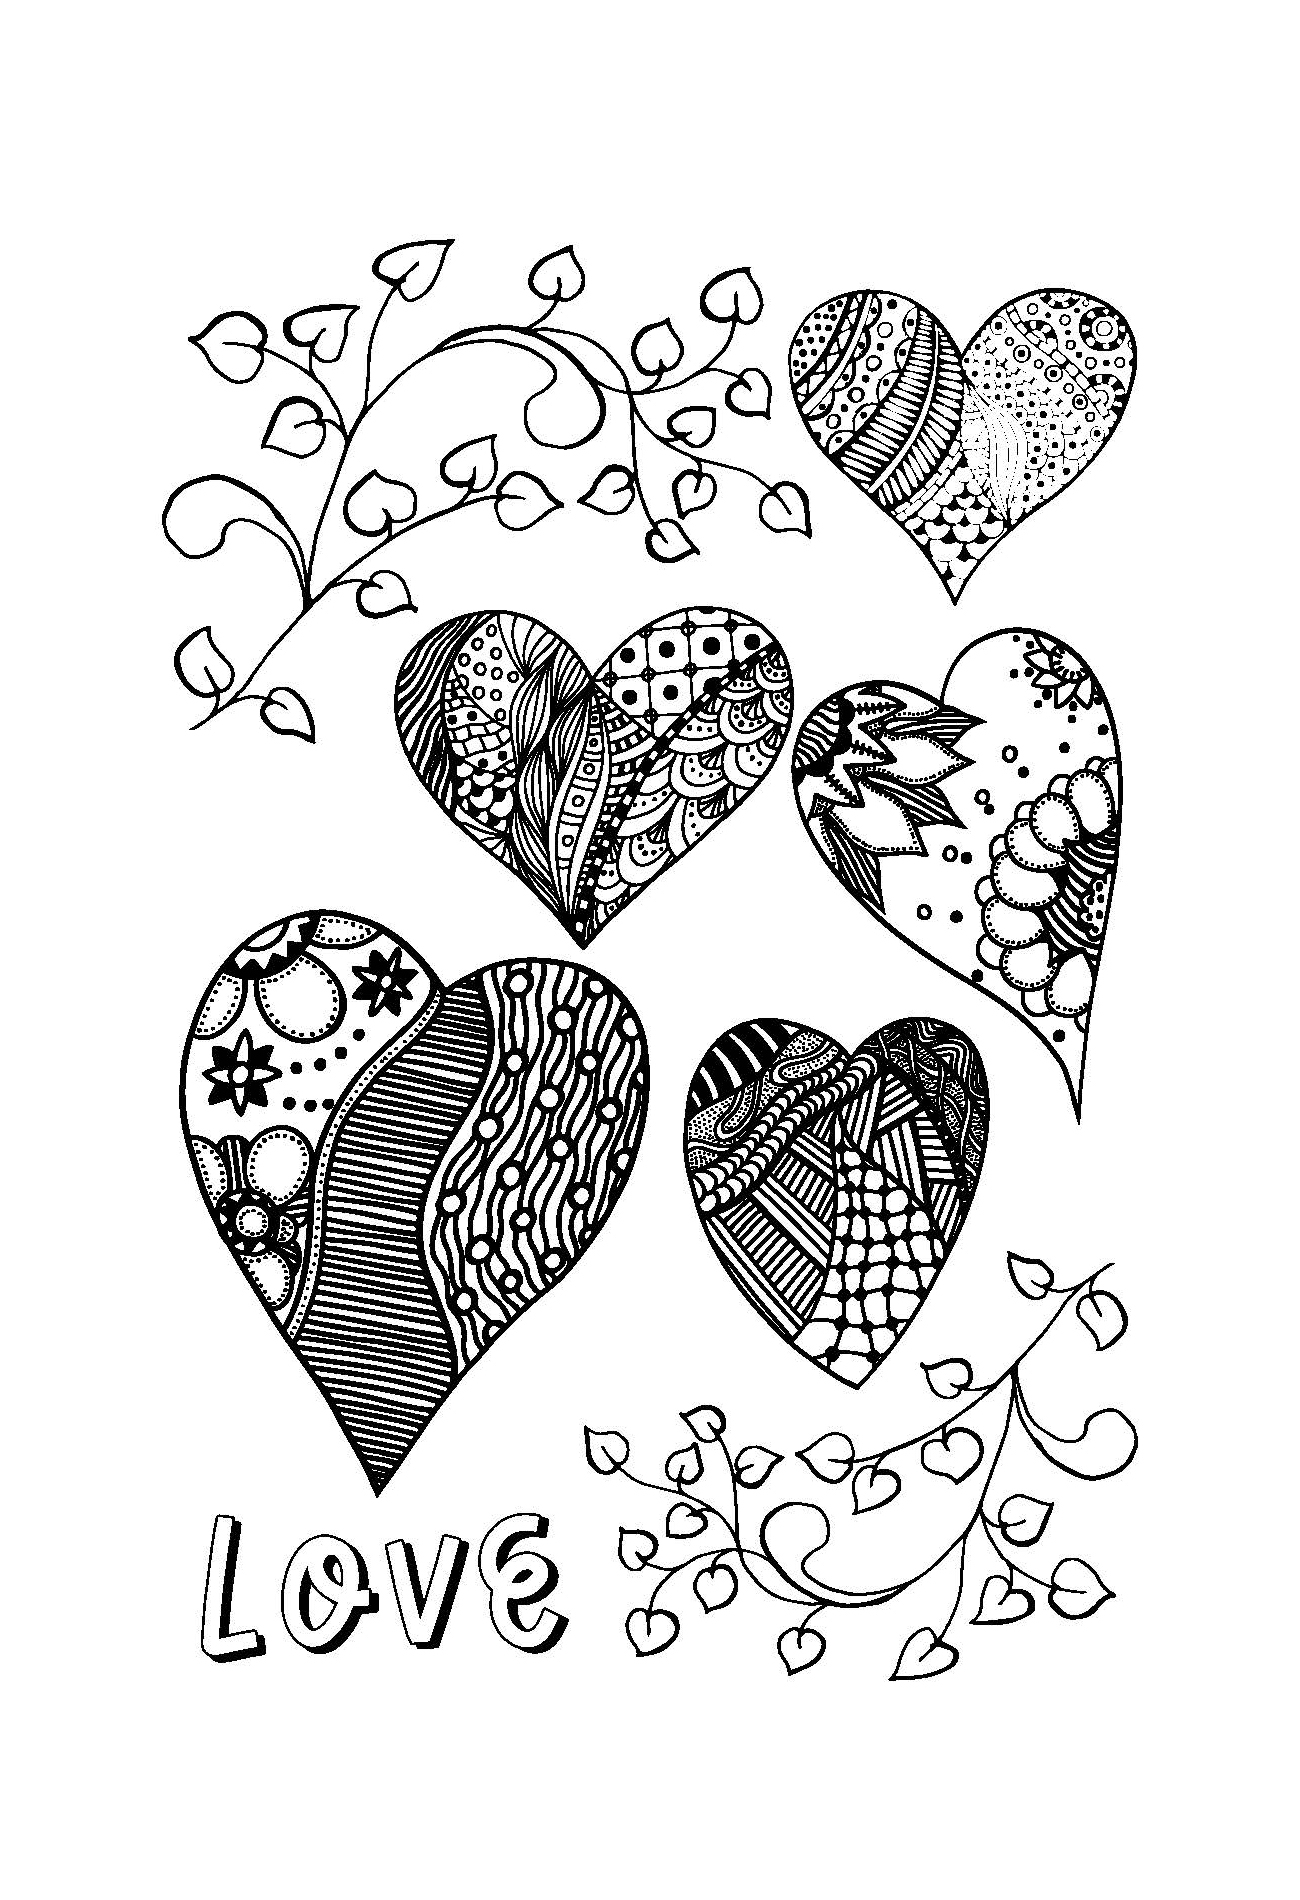 Love Colouring Page - Digital Download